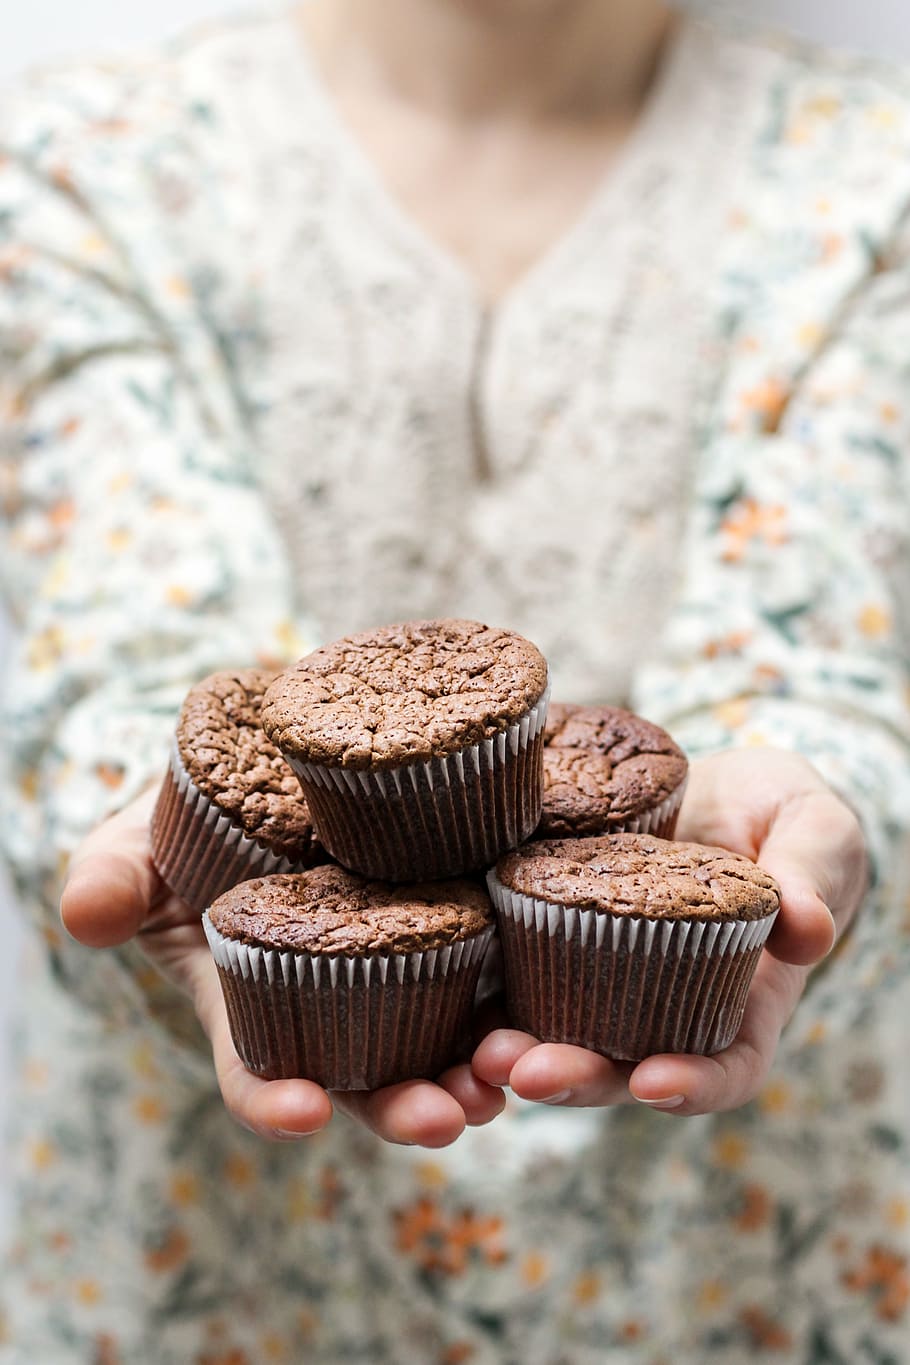 five, muffins, person hands, offer, food, cupcake, chocolate, brown, paper, bake